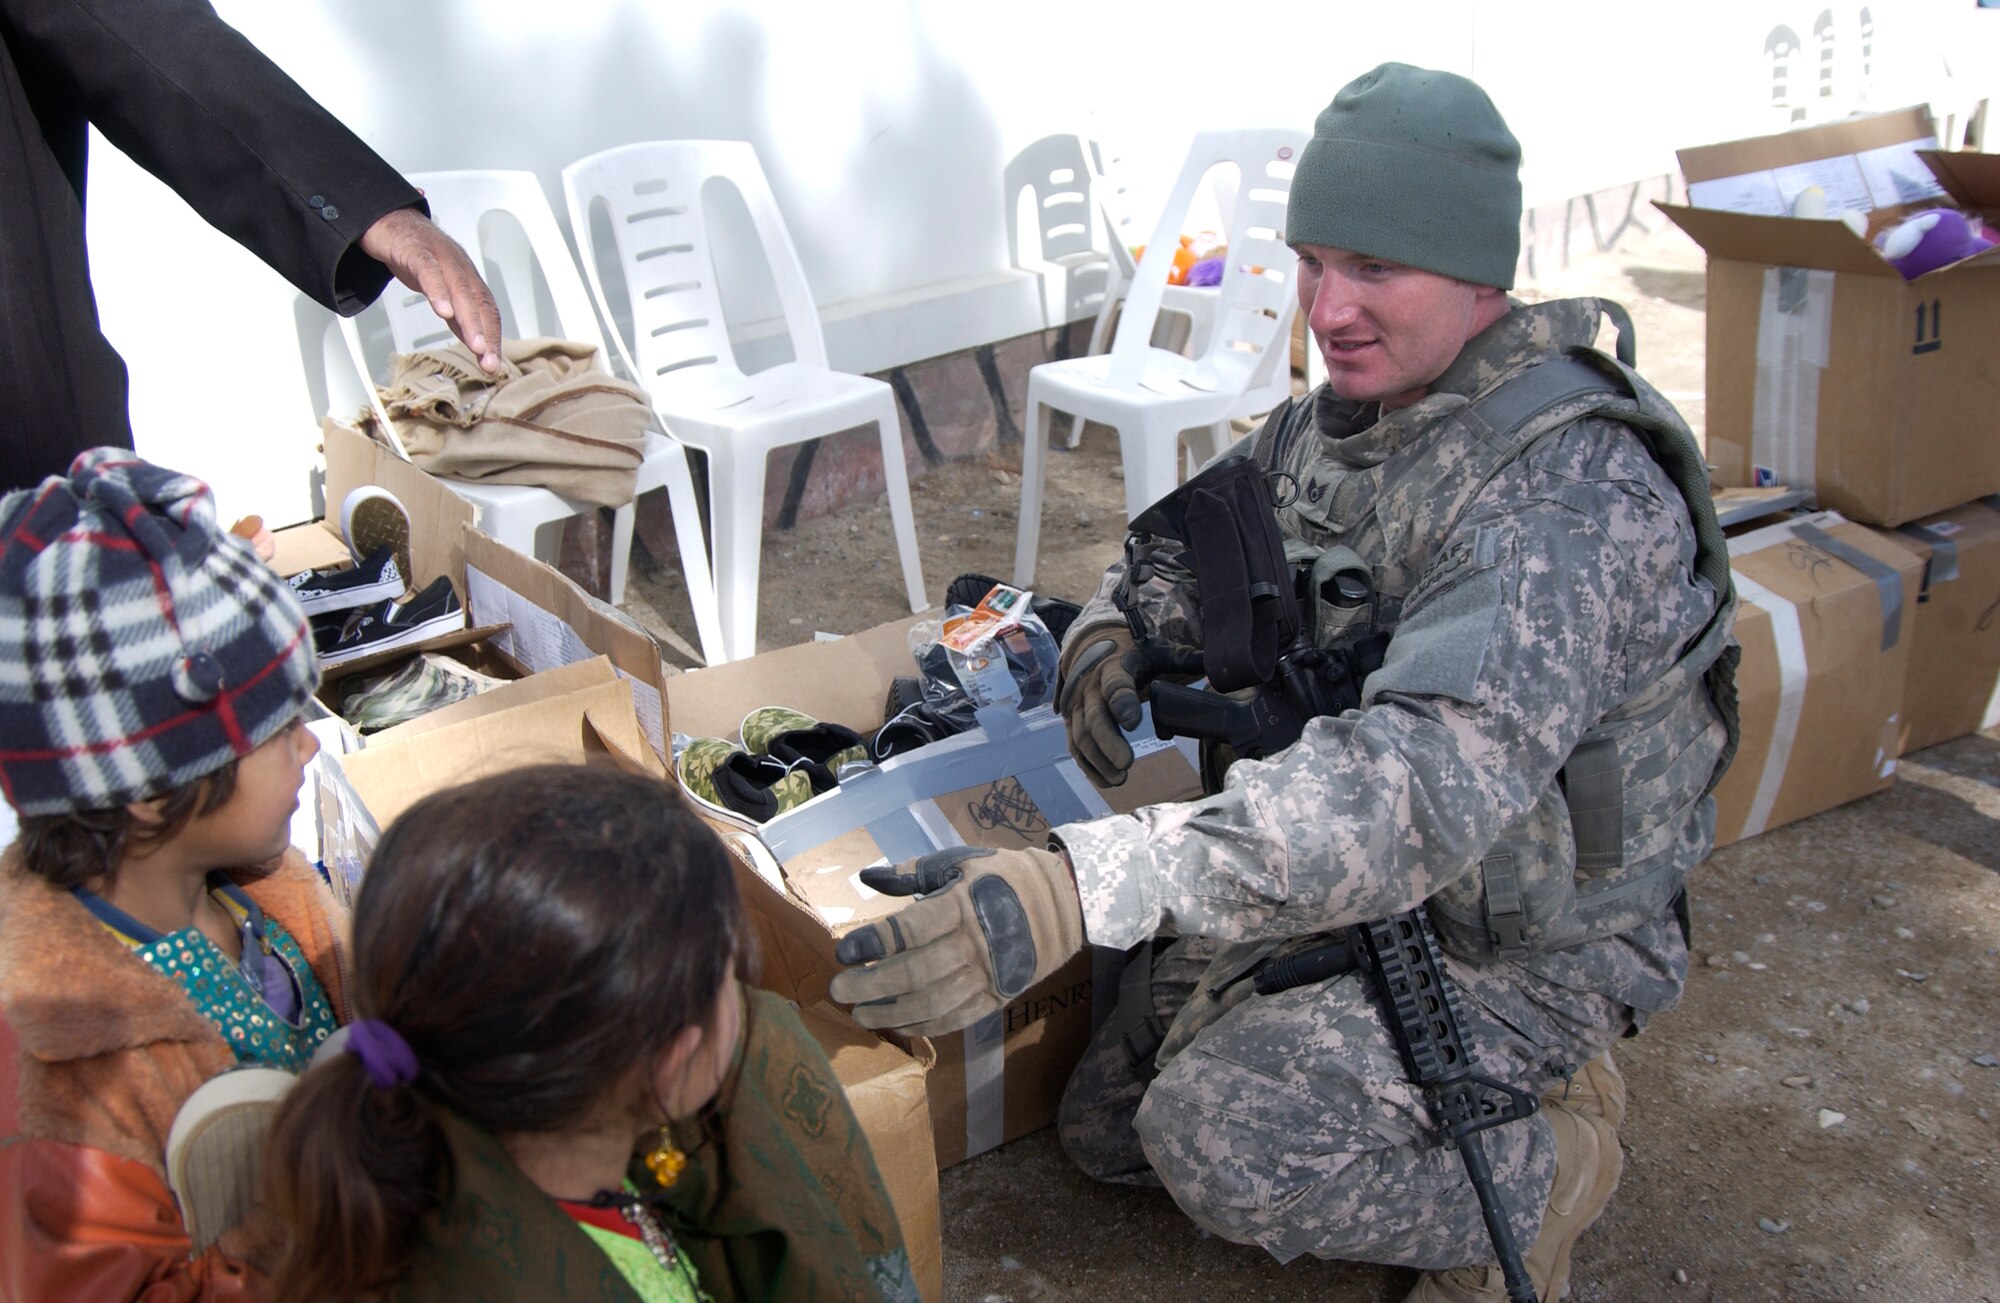 Nearly 200 children waited anxiously as Staff Sgt. Josh Paden and the members of the Zabul Provincial Reconstruction Team distributed the boxes filled with donations. Sergeant Paden, with the help of his mother, Diane Paden and the Pendleton County community in West Virginia, were able to give shoes, clothes and toys to the children of Qalat City, Afghanistan. (U.S. Air Force photo by 1st Lt. Amber Balken)